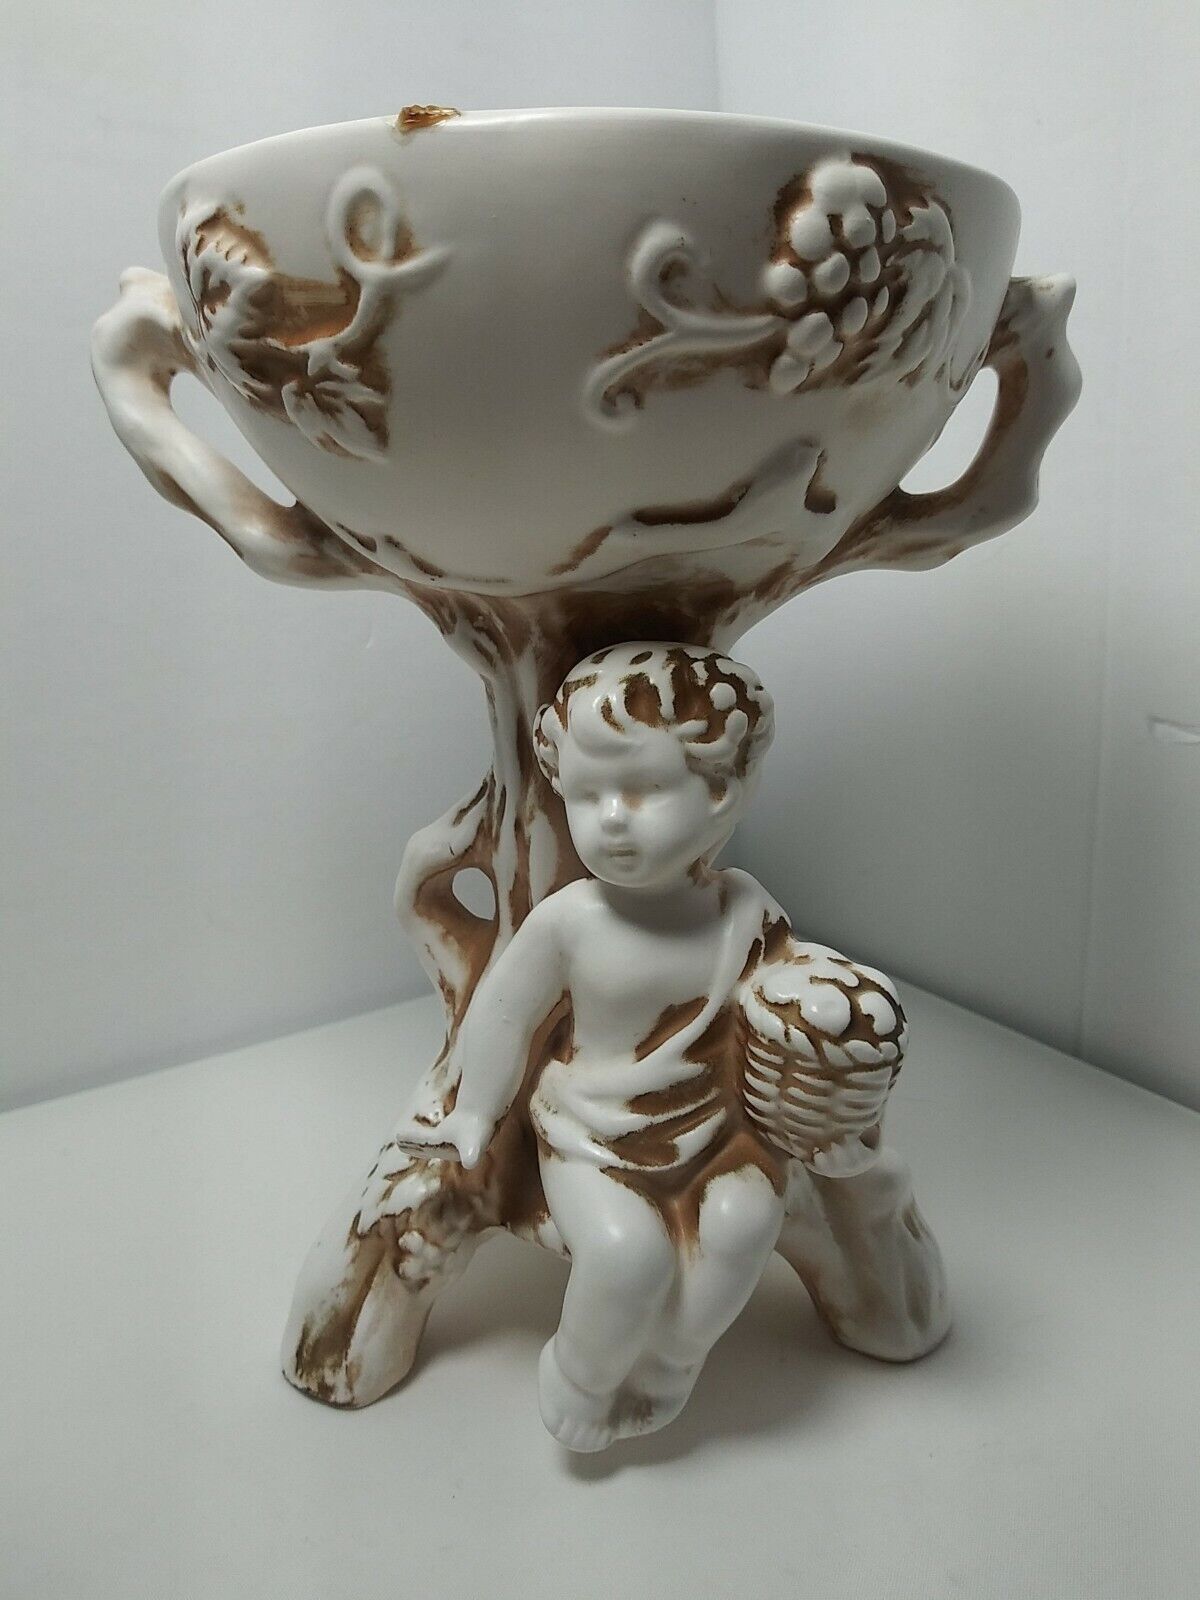 Vintage 1963 Ivory Planter Grape Vine Baby Holding Backet By Inarco Cleveland OH